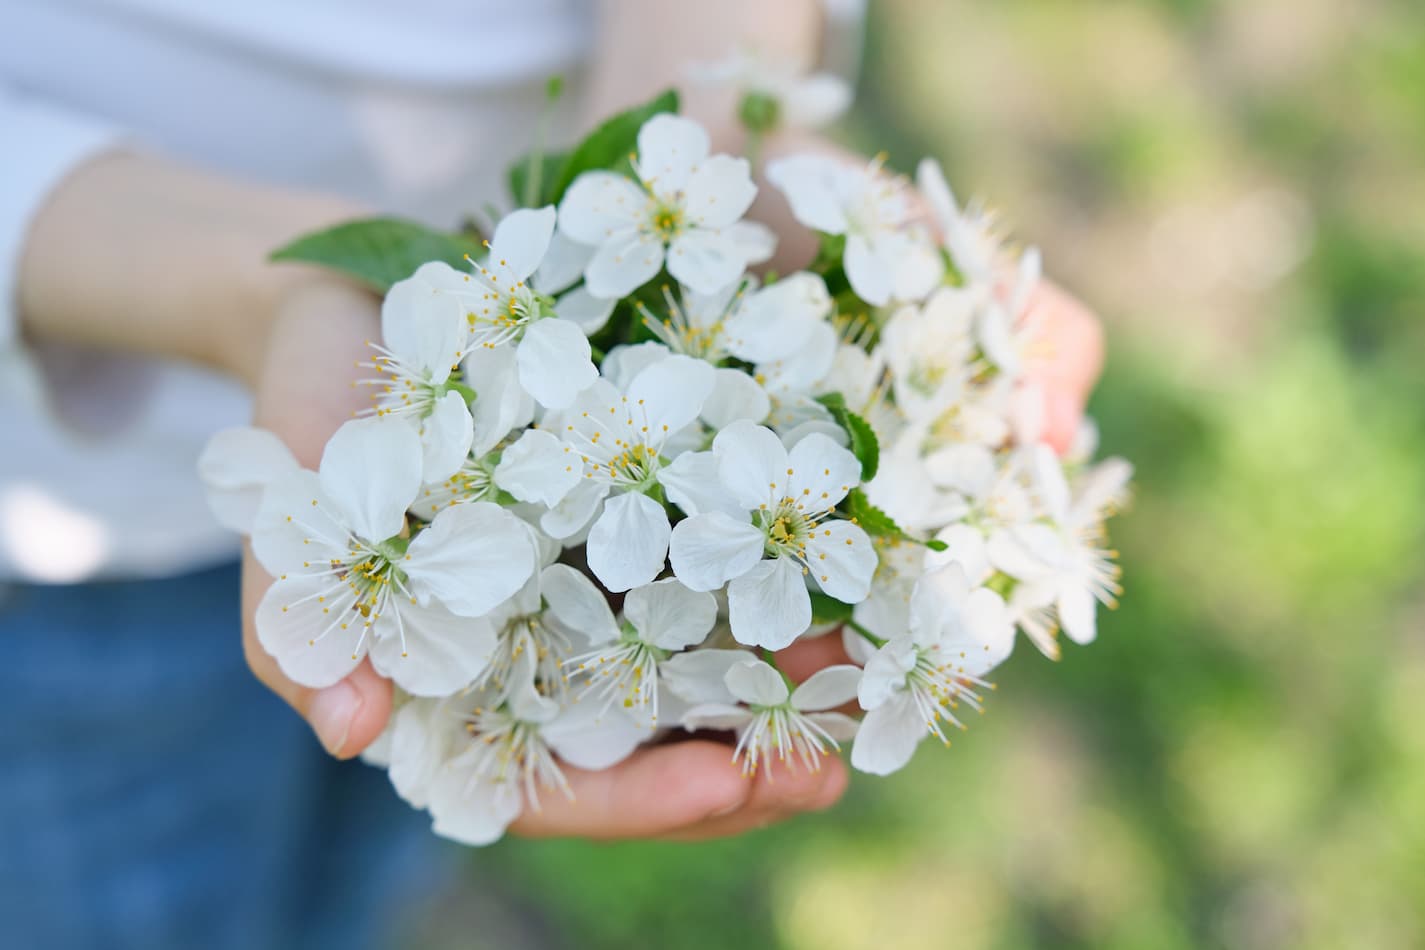 image of a person holding various spring flowers